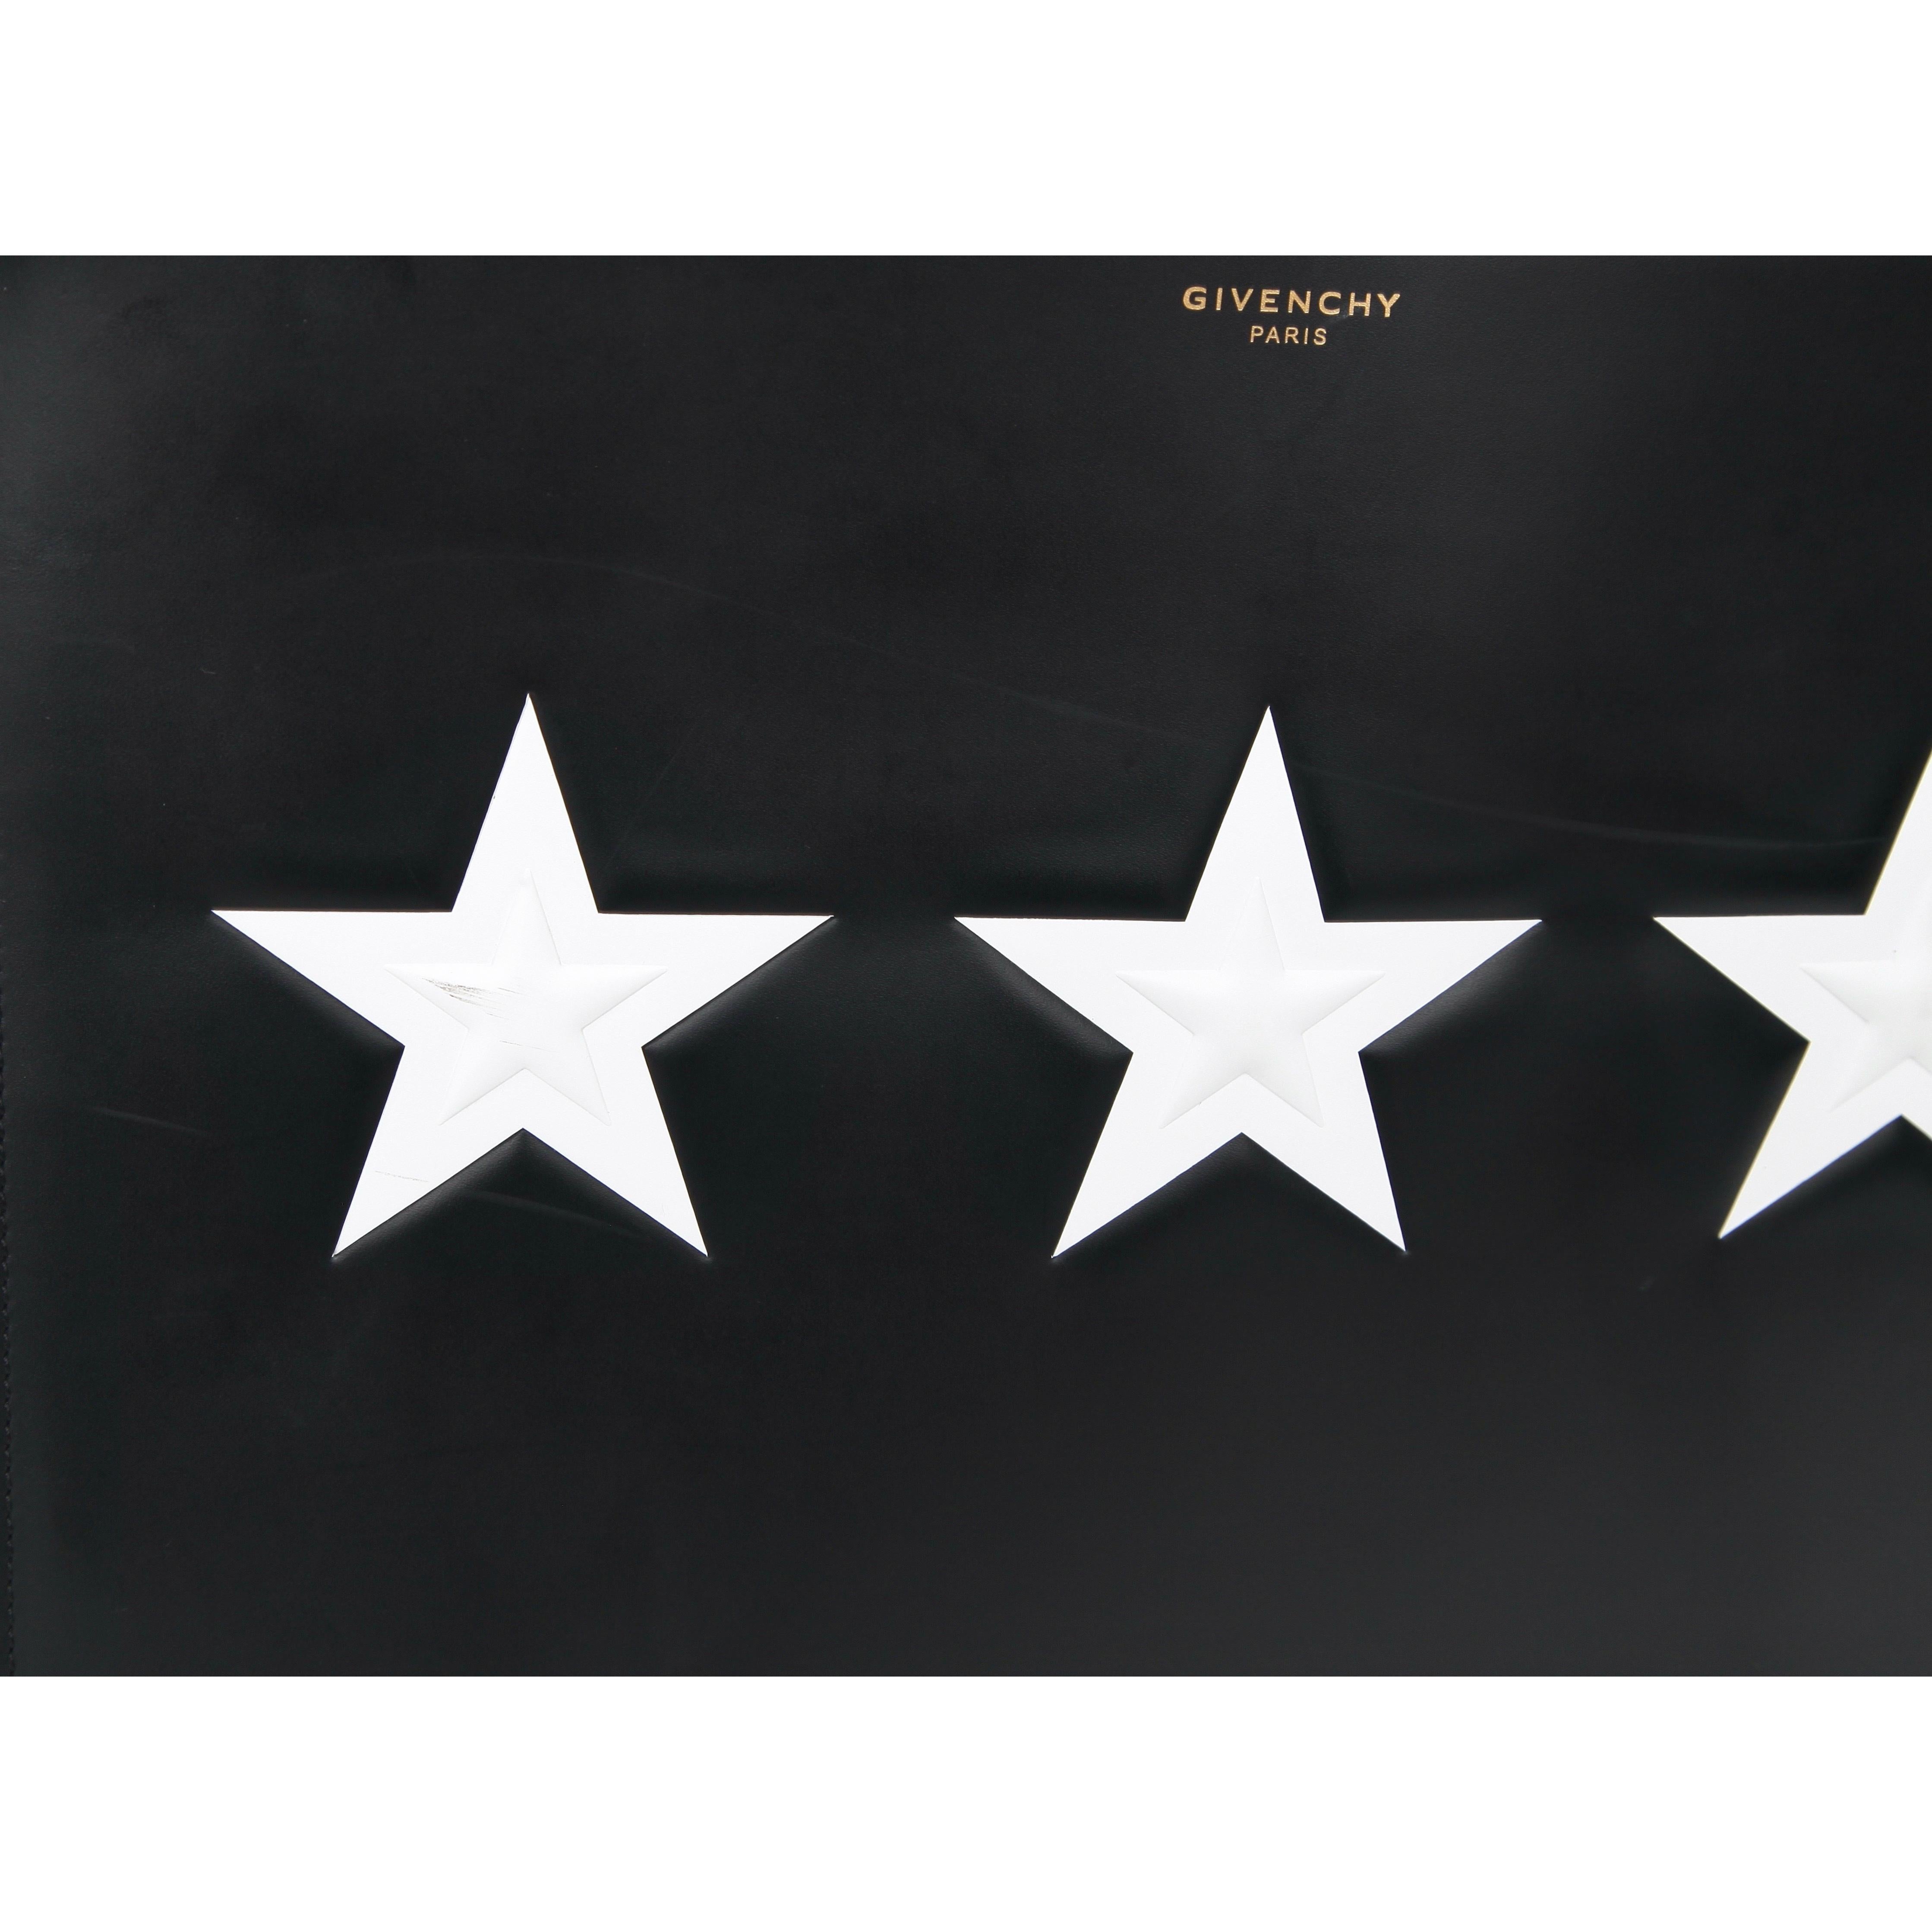 GUARANTEED AUTHENTIC GIVENCHY BLACK LEATHER STAR MOTIF POUCH

Sold Out In Boutiques


Details:
- Classic black leather pouch with white star motifs.
- Top zipper closure.
- One compartment.
- Leather interior.
- Packaged carefully, dust bag not